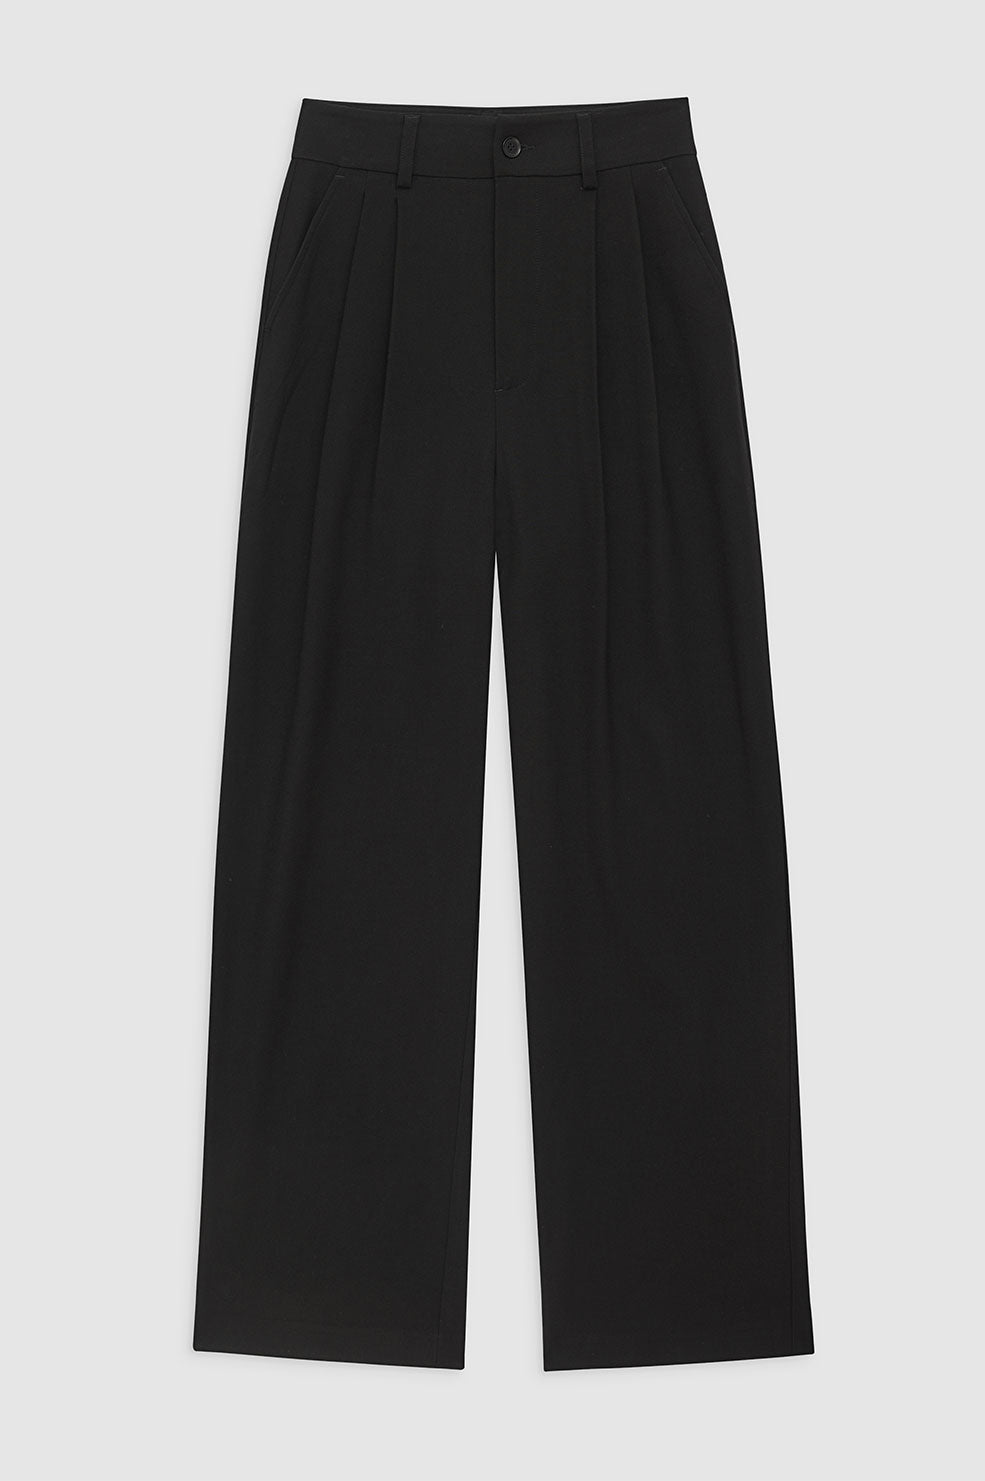 ANINE BING Carrie Pant - Black Twill - Front View